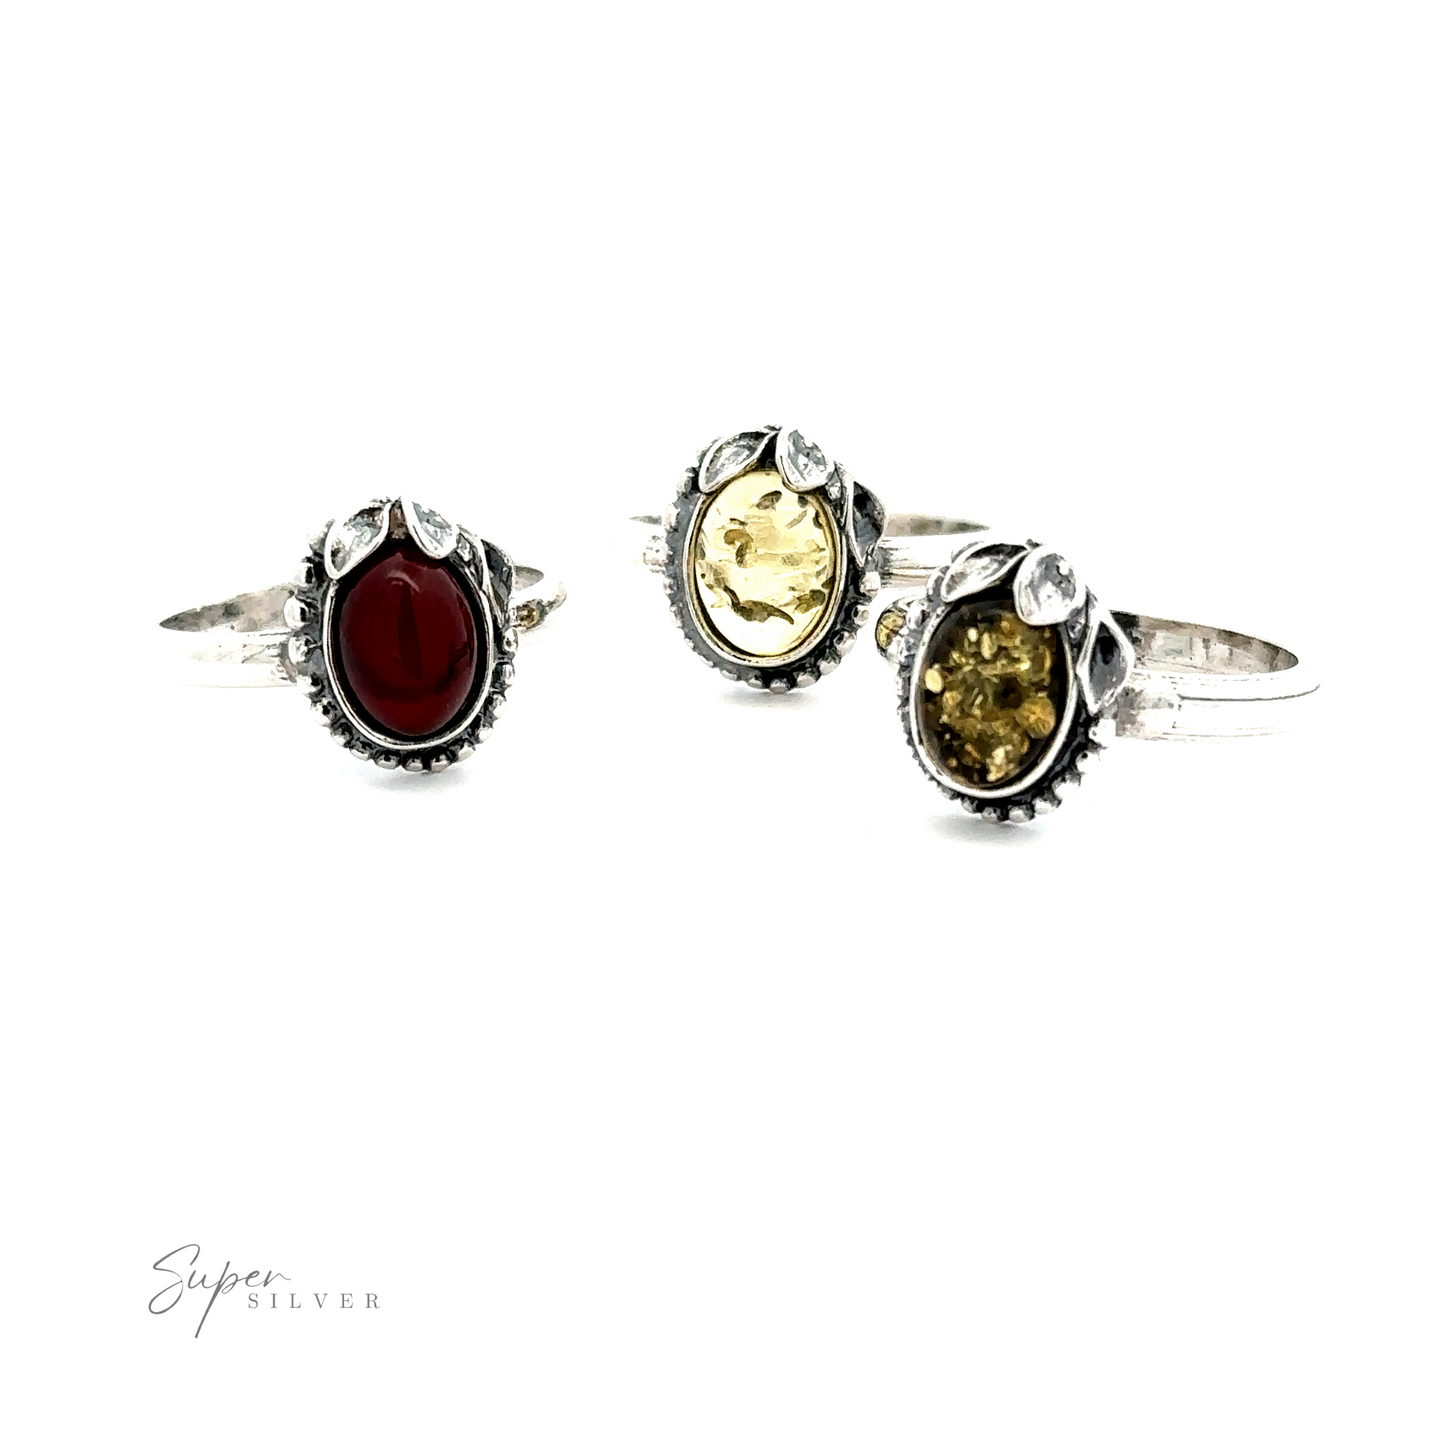 
                  
                    Three Amber Rings with Beaded Border and Peace Lily Details, each exuding vintage elegance with oval gemstones: one red and two shades of yellow, set against a white background. The brand name "Super Silver" is visible in the bottom left corner, highlighting their nature-inspired jewelry collection.
                  
                